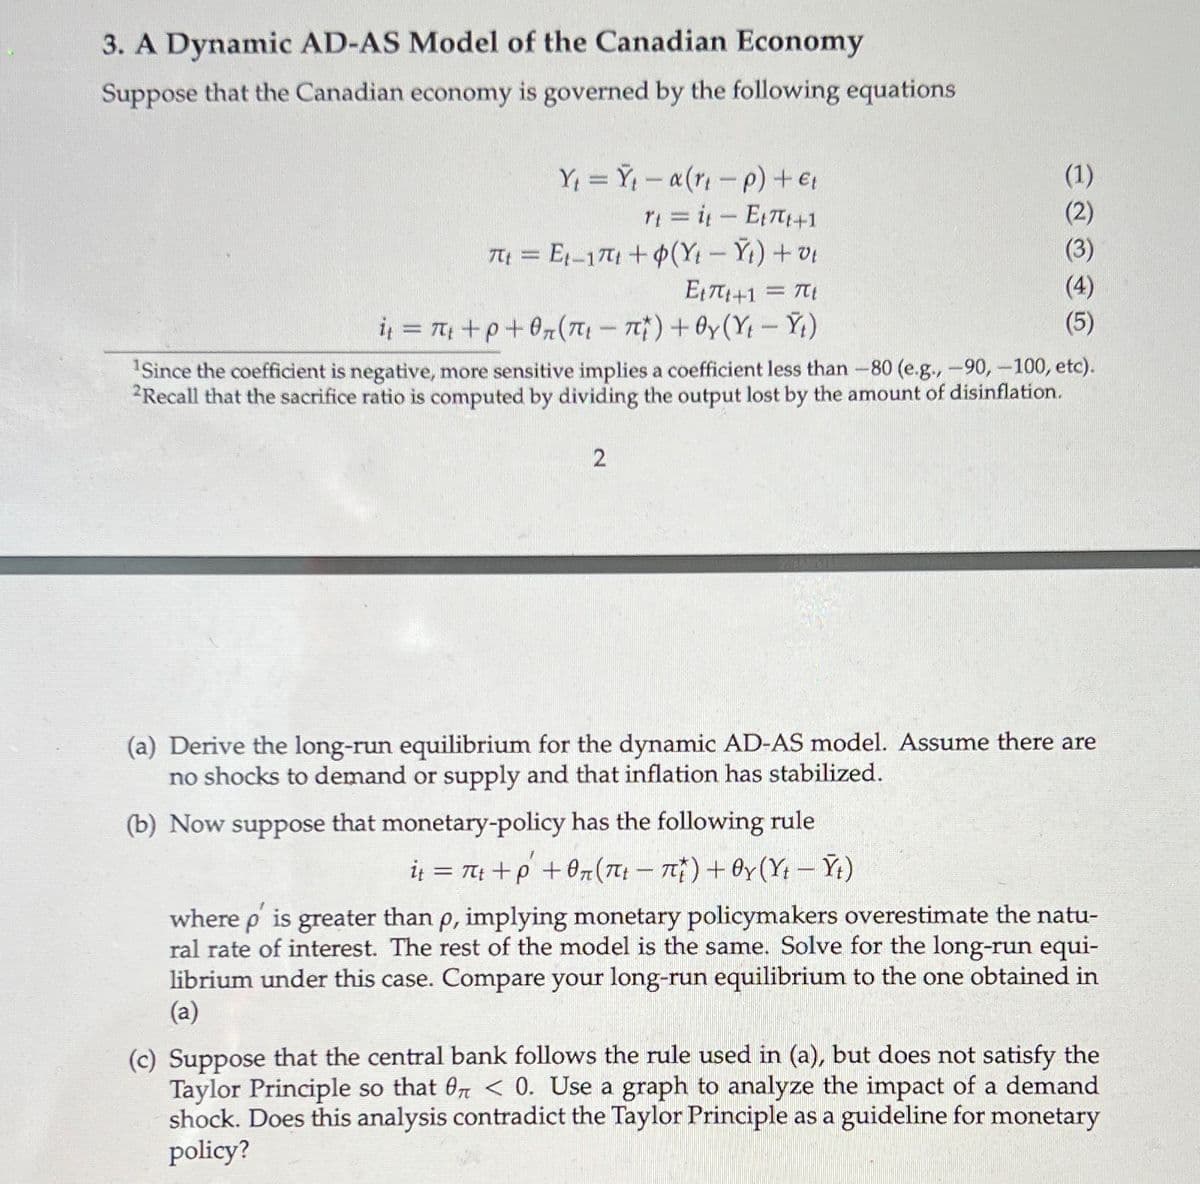 3. A Dynamic AD-AS Model of the Canadian Economy
Suppose that the Canadian economy is governed by the following equations
Y = Y - a(r -p) + €;
YI = i-E+1
T = E1-17 +(Y- Yt)+v
E1T+1 = T
i = 7 +p+0(7 - n)+Oy(Y- Ý;)
(1)
(2)
(3)
(4)
(5)
Since the coefficient is negative, more sensitive implies a coefficient less than -80 (e.g.,-90, -100, etc).
2Recall that the sacrifice ratio is computed by dividing the output lost by the amount of disinflation.
(a) Derive the long-run equilibrium for the dynamic AD-AS model. Assume there are
no shocks to demand or supply and that inflation has stabilized.
(b) Now suppose that monetary-policy has the following rule
iį = T; +p +0r(7: – 7)+ Oy(Y; – Ýt)
where p is greater than p, implying monetary policymakers overestimate the natu-
ral rate of interest. The rest of the model is the same. Solve for the long-run equi-
librium under this case. Compare your long-run equilibrium to the one obtained in
(a)
(c) Suppose that the central bank follows the rule used in (a), but does not satisfy the
Taylor Principle so that 07 < 0. Use a graph to analyze the impact of a demand
shock. Does this analysis contradict the Taylor Principle as a guideline for monetary
policy?
